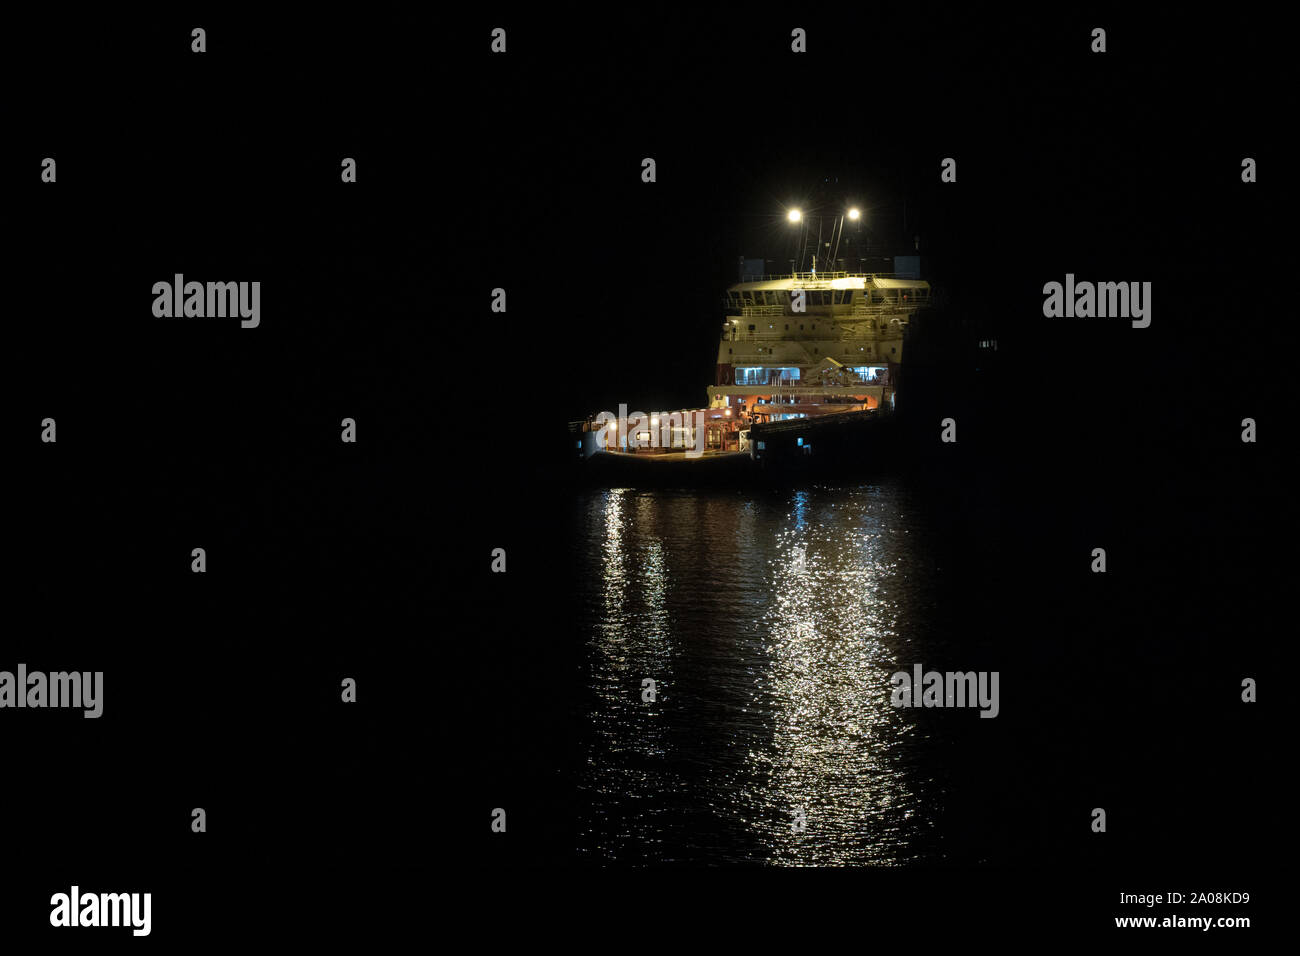 Borneo, Indonesia - July 2019: Maersk owned oil field support vessel standing by on an oil field by night Stock Photo